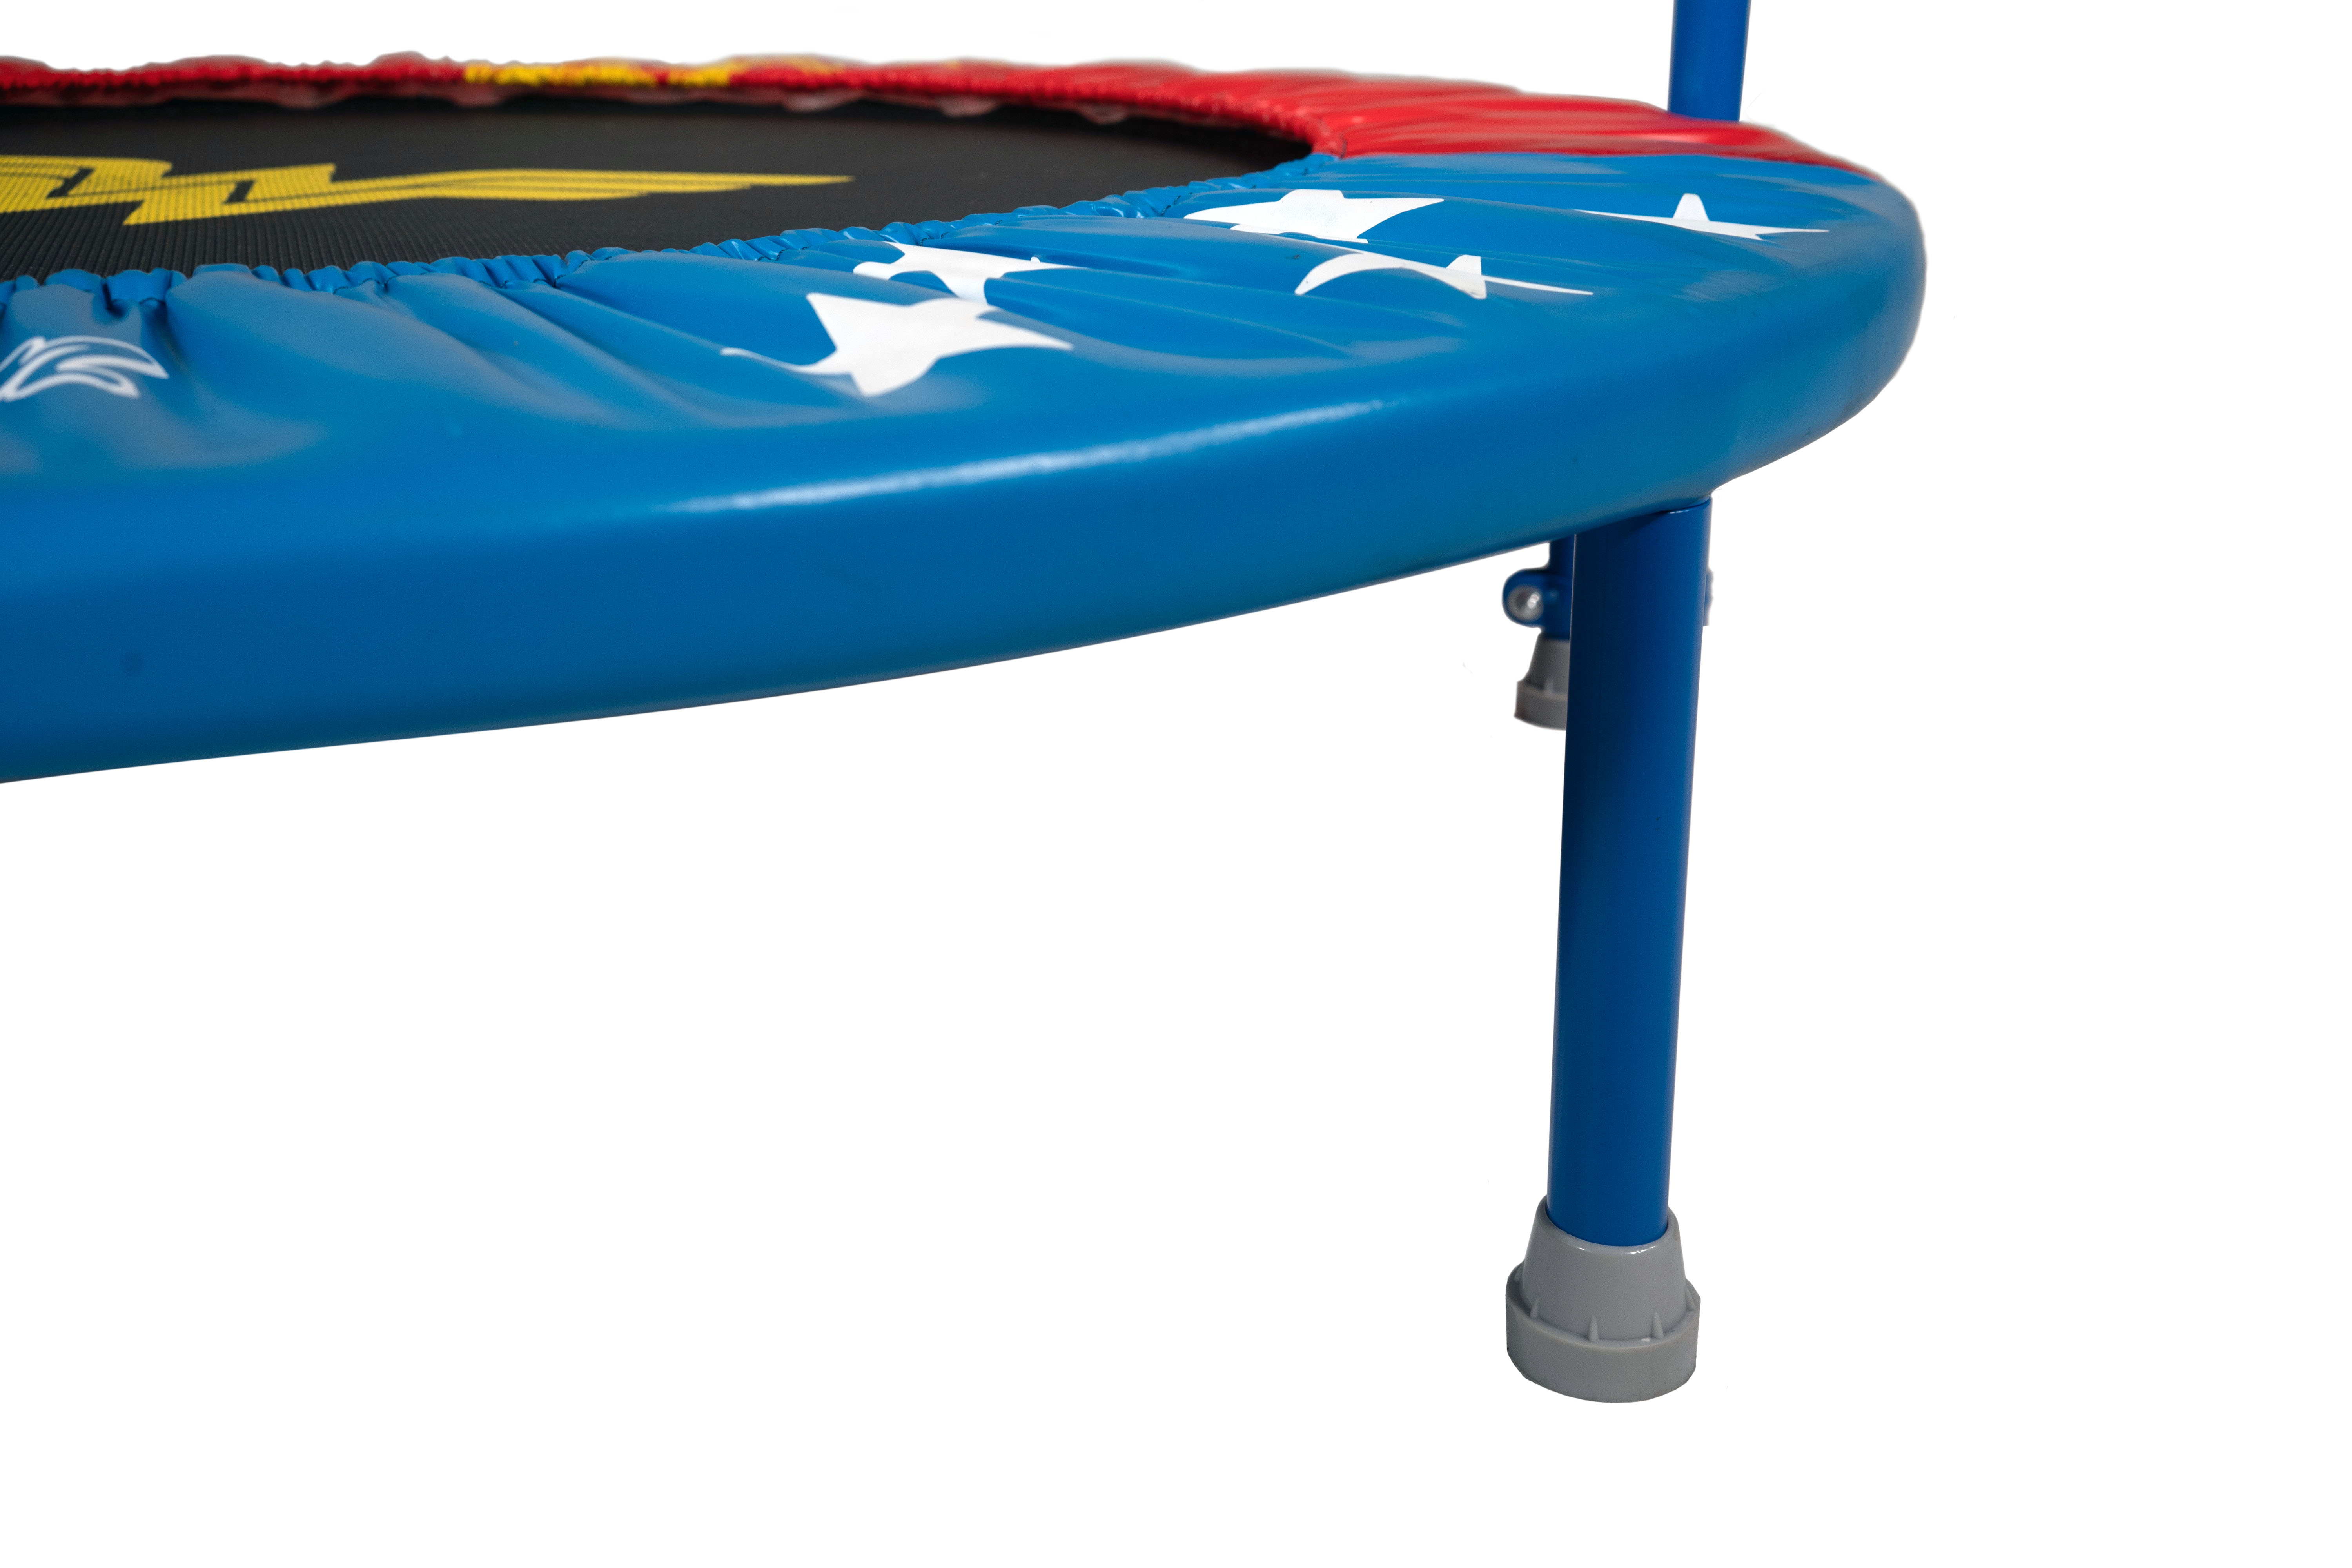 My First Wonder Woman 36-Inch Trampoline, with Handlebar - image 4 of 6